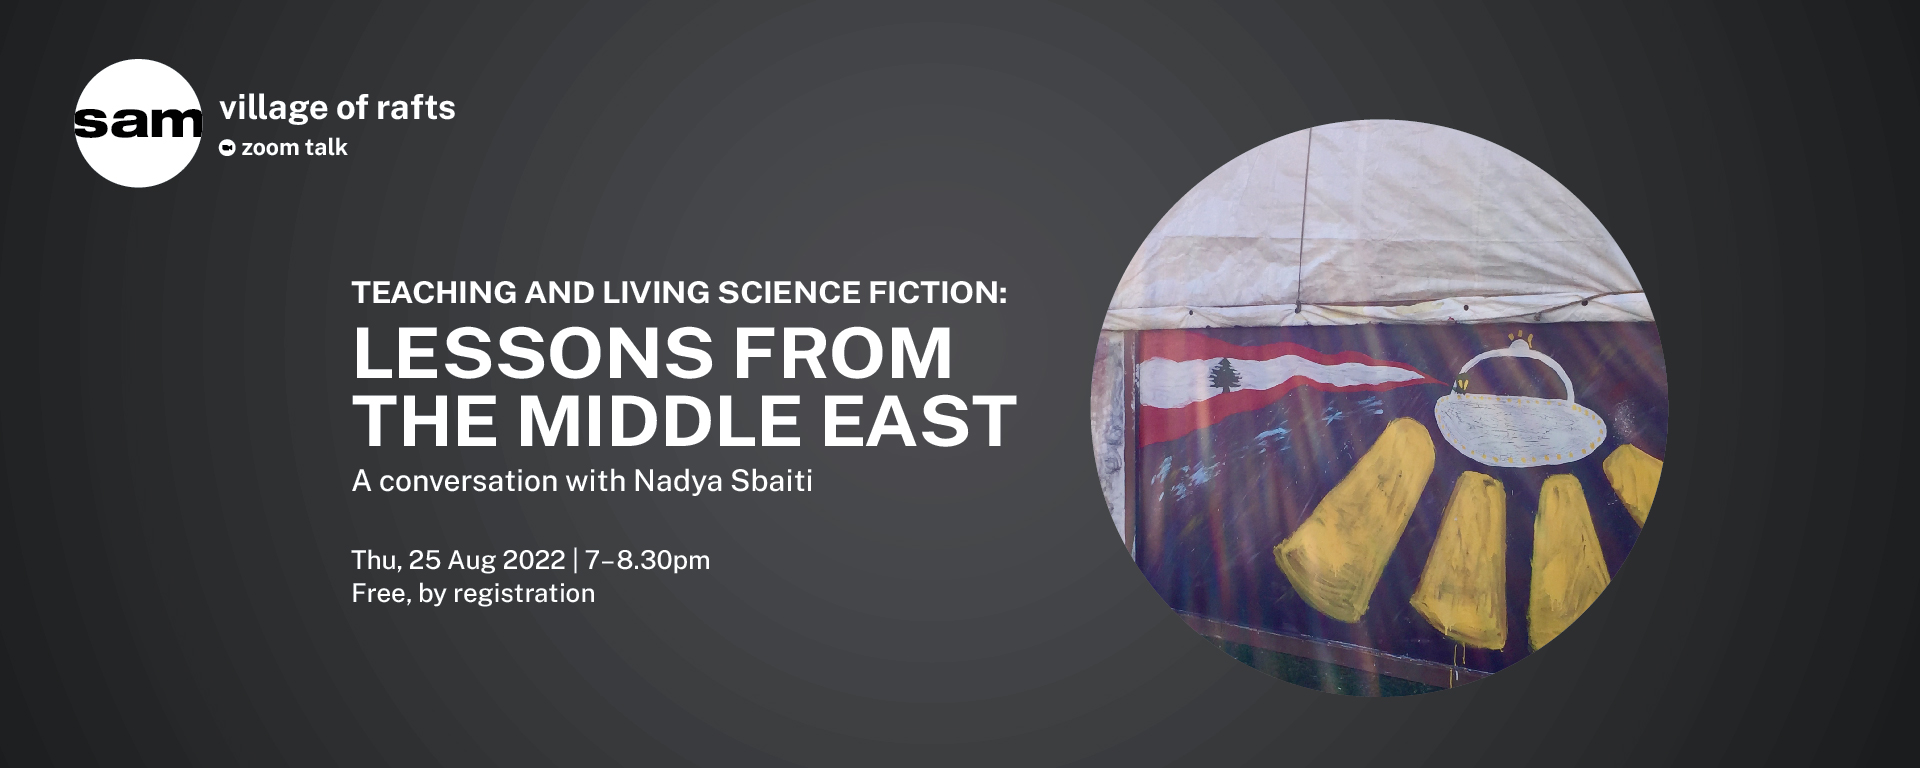 Teaching and Living Science Fiction: Lessons from the Middle East